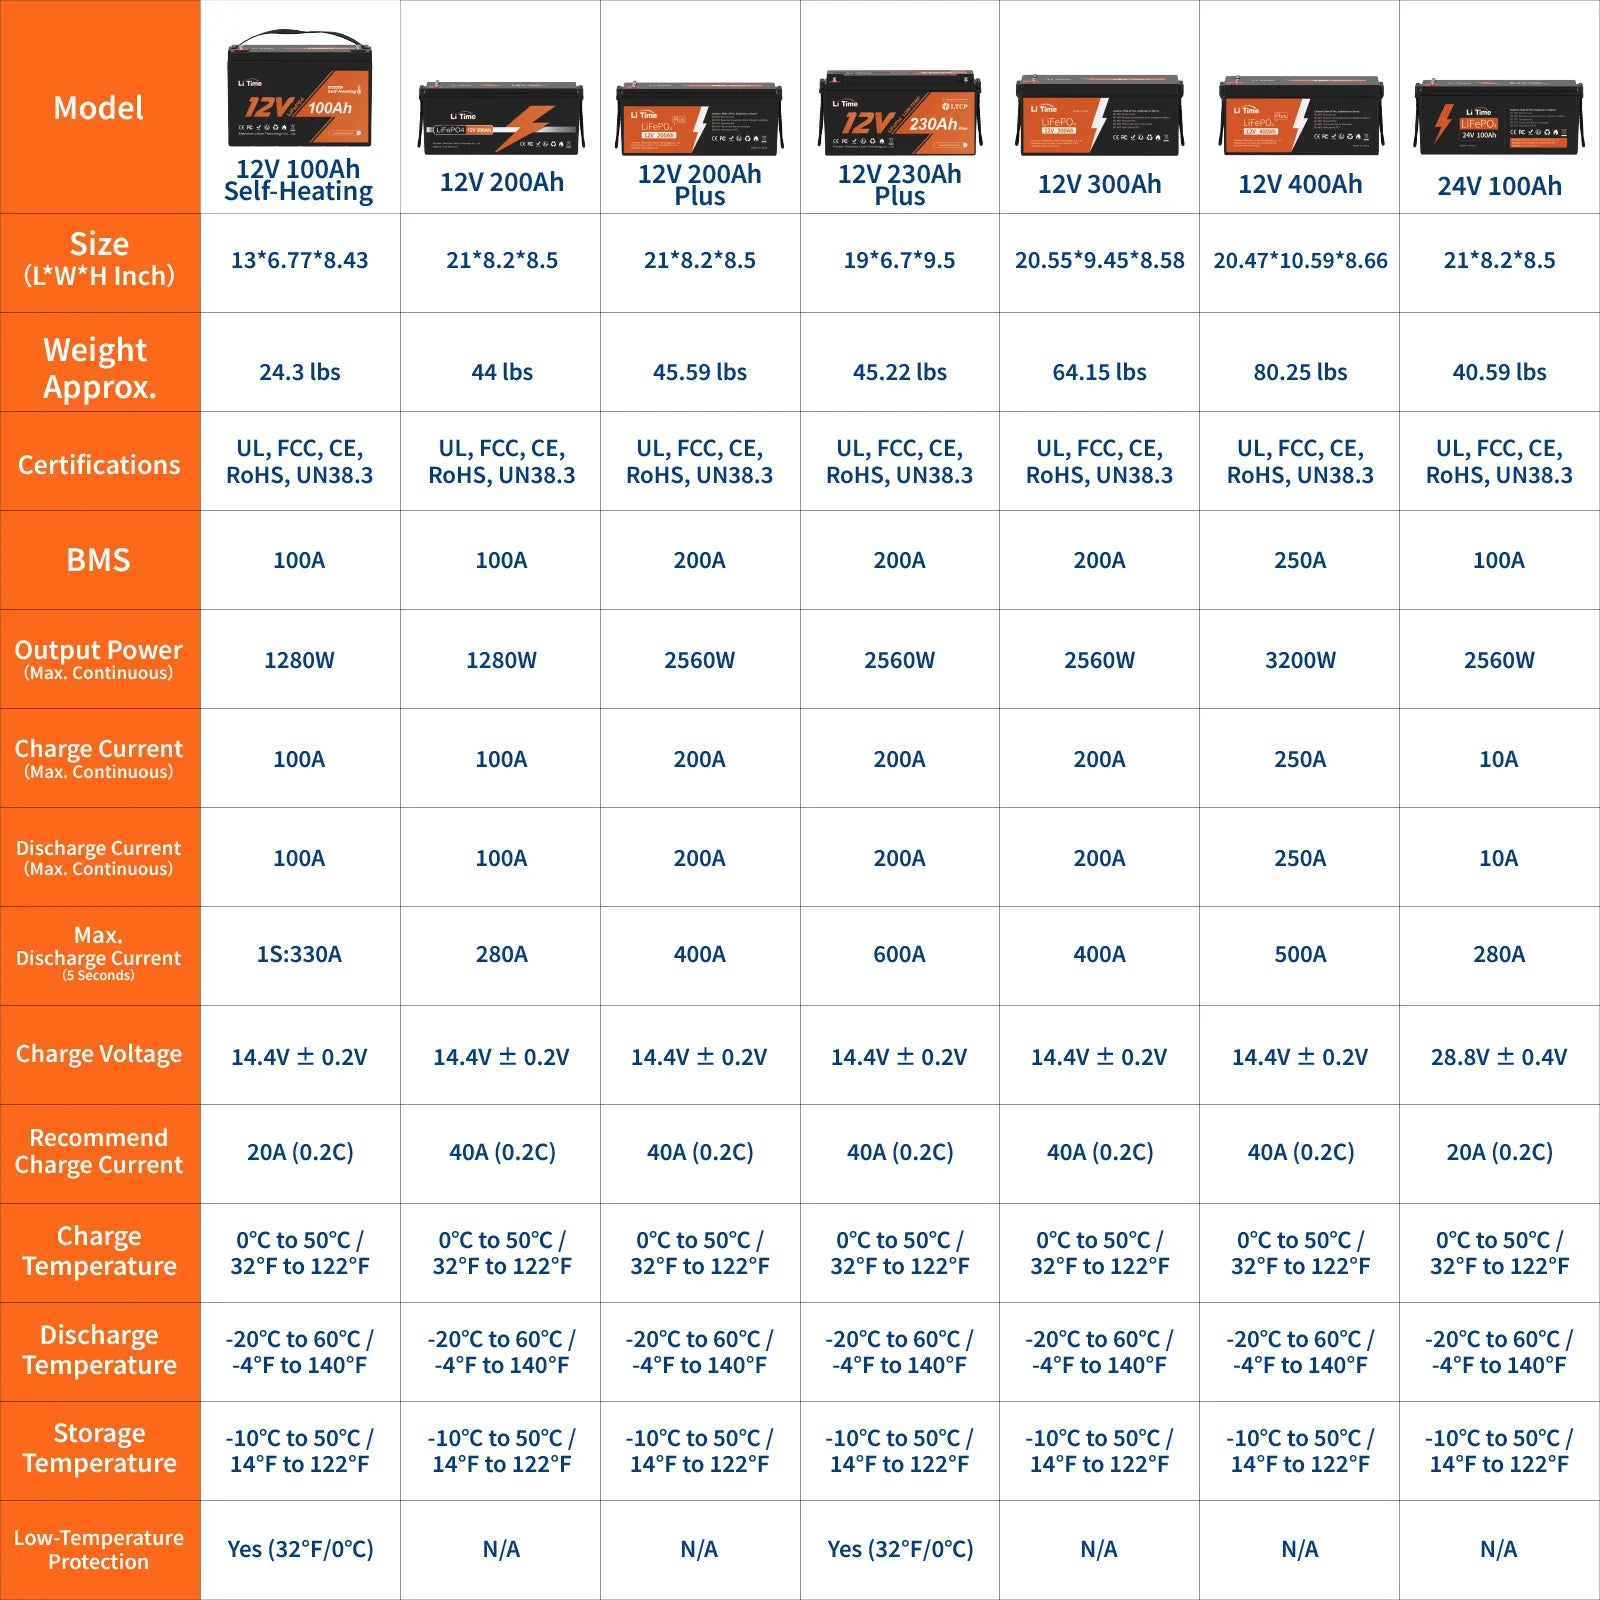 LiTime comparison of various battery types